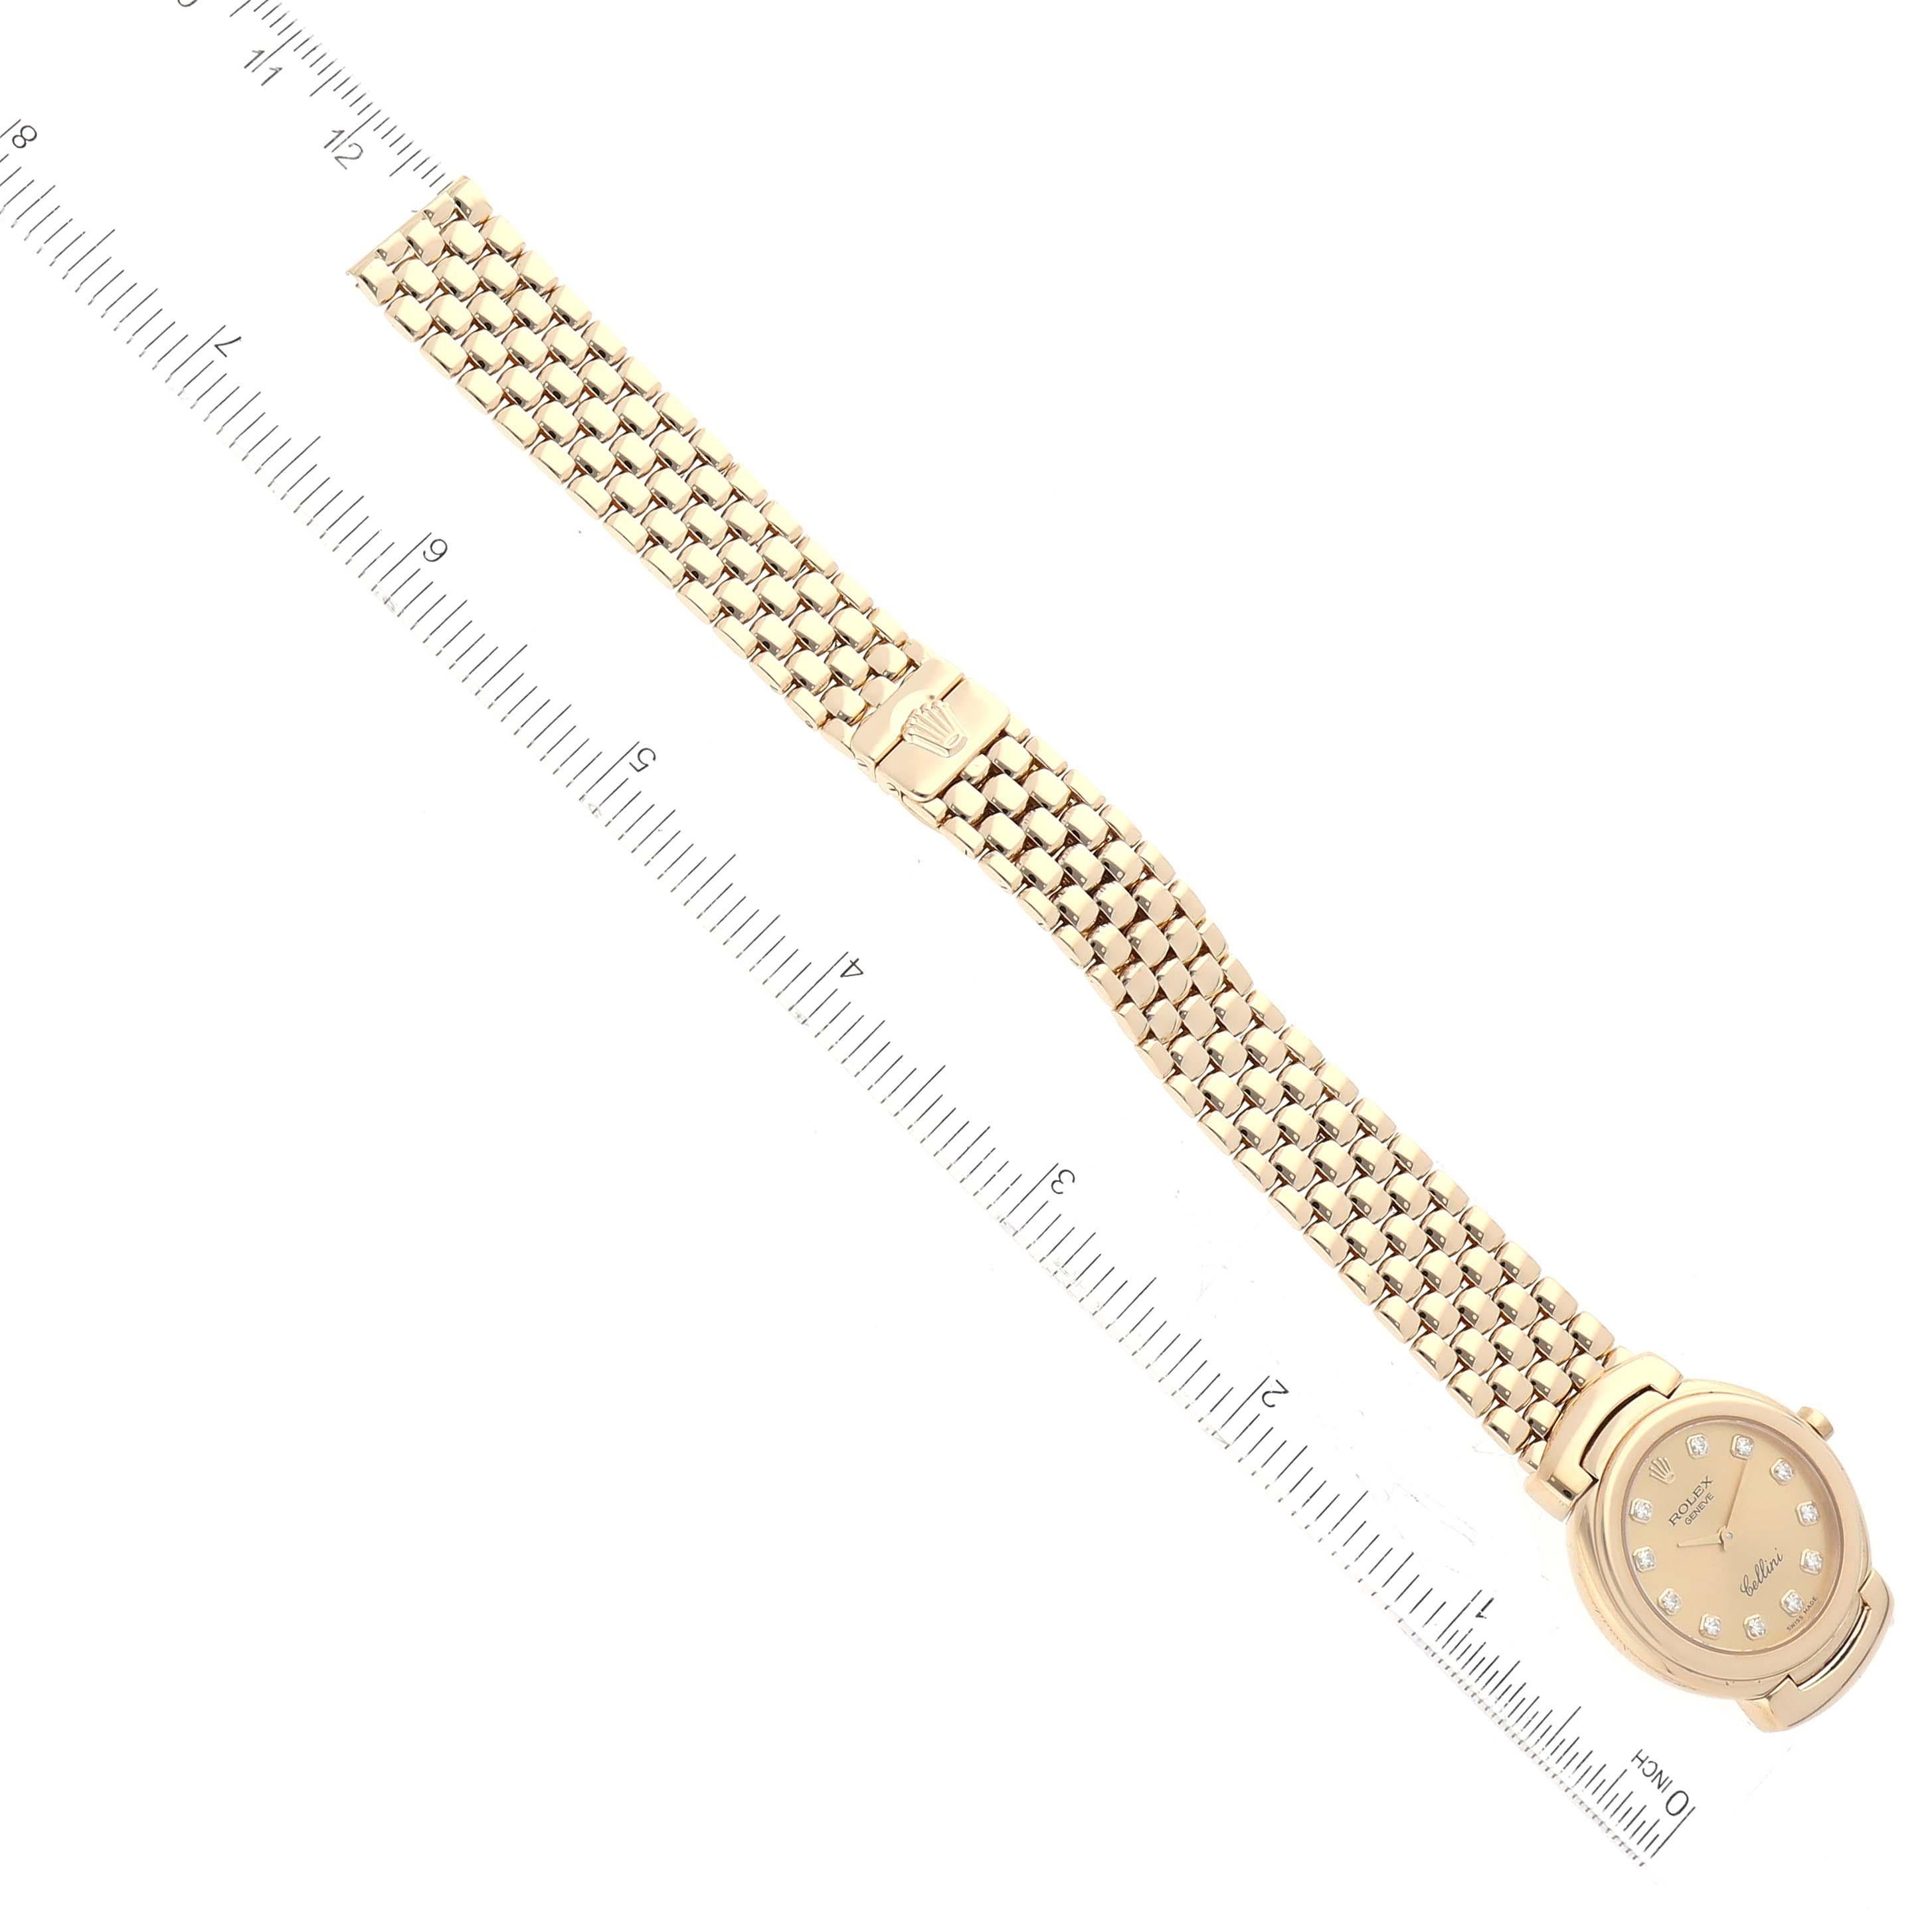 Rolex Cellini Yellow Gold Champagne Diamond Dial Ladies Watch 6621 2